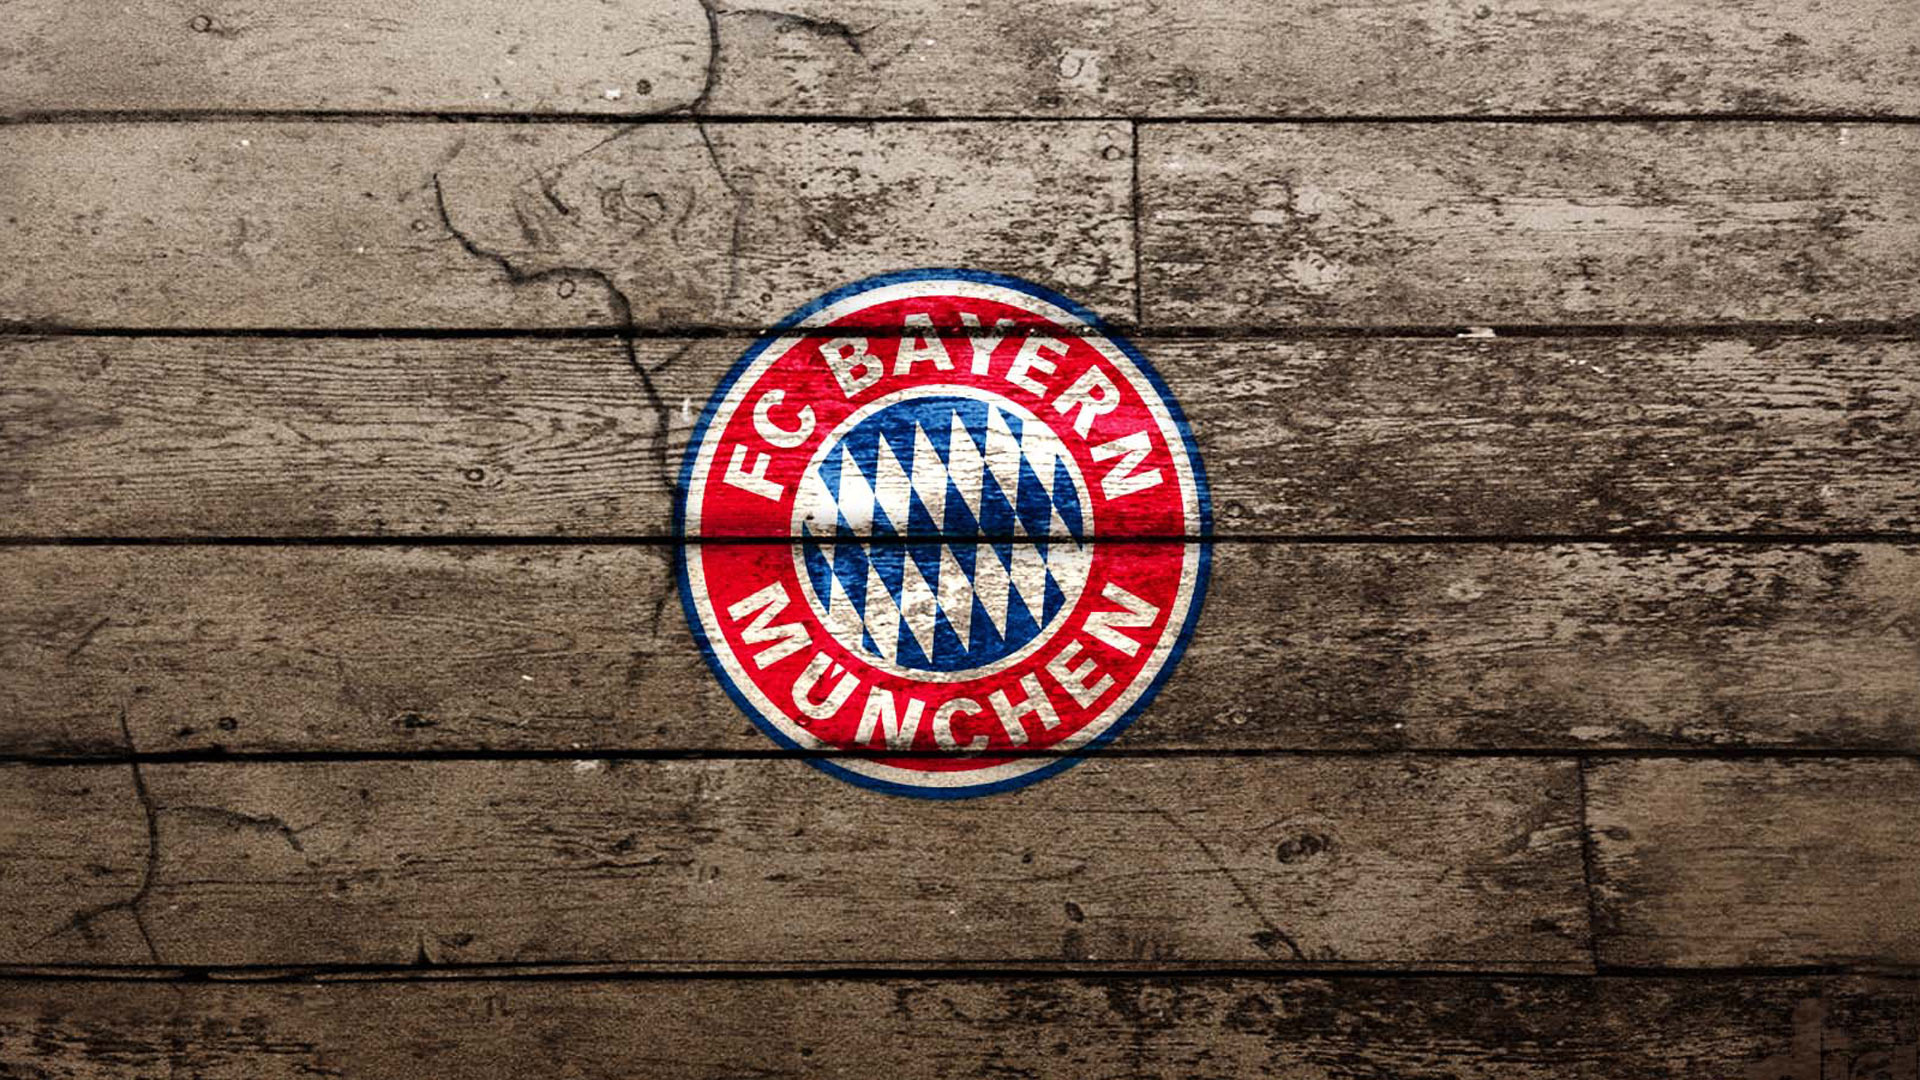 Bayern Munchen FC: The Reds, Logo, One of Europe's top clubs, having won numerous international honors. 1920x1080 Full HD Wallpaper.